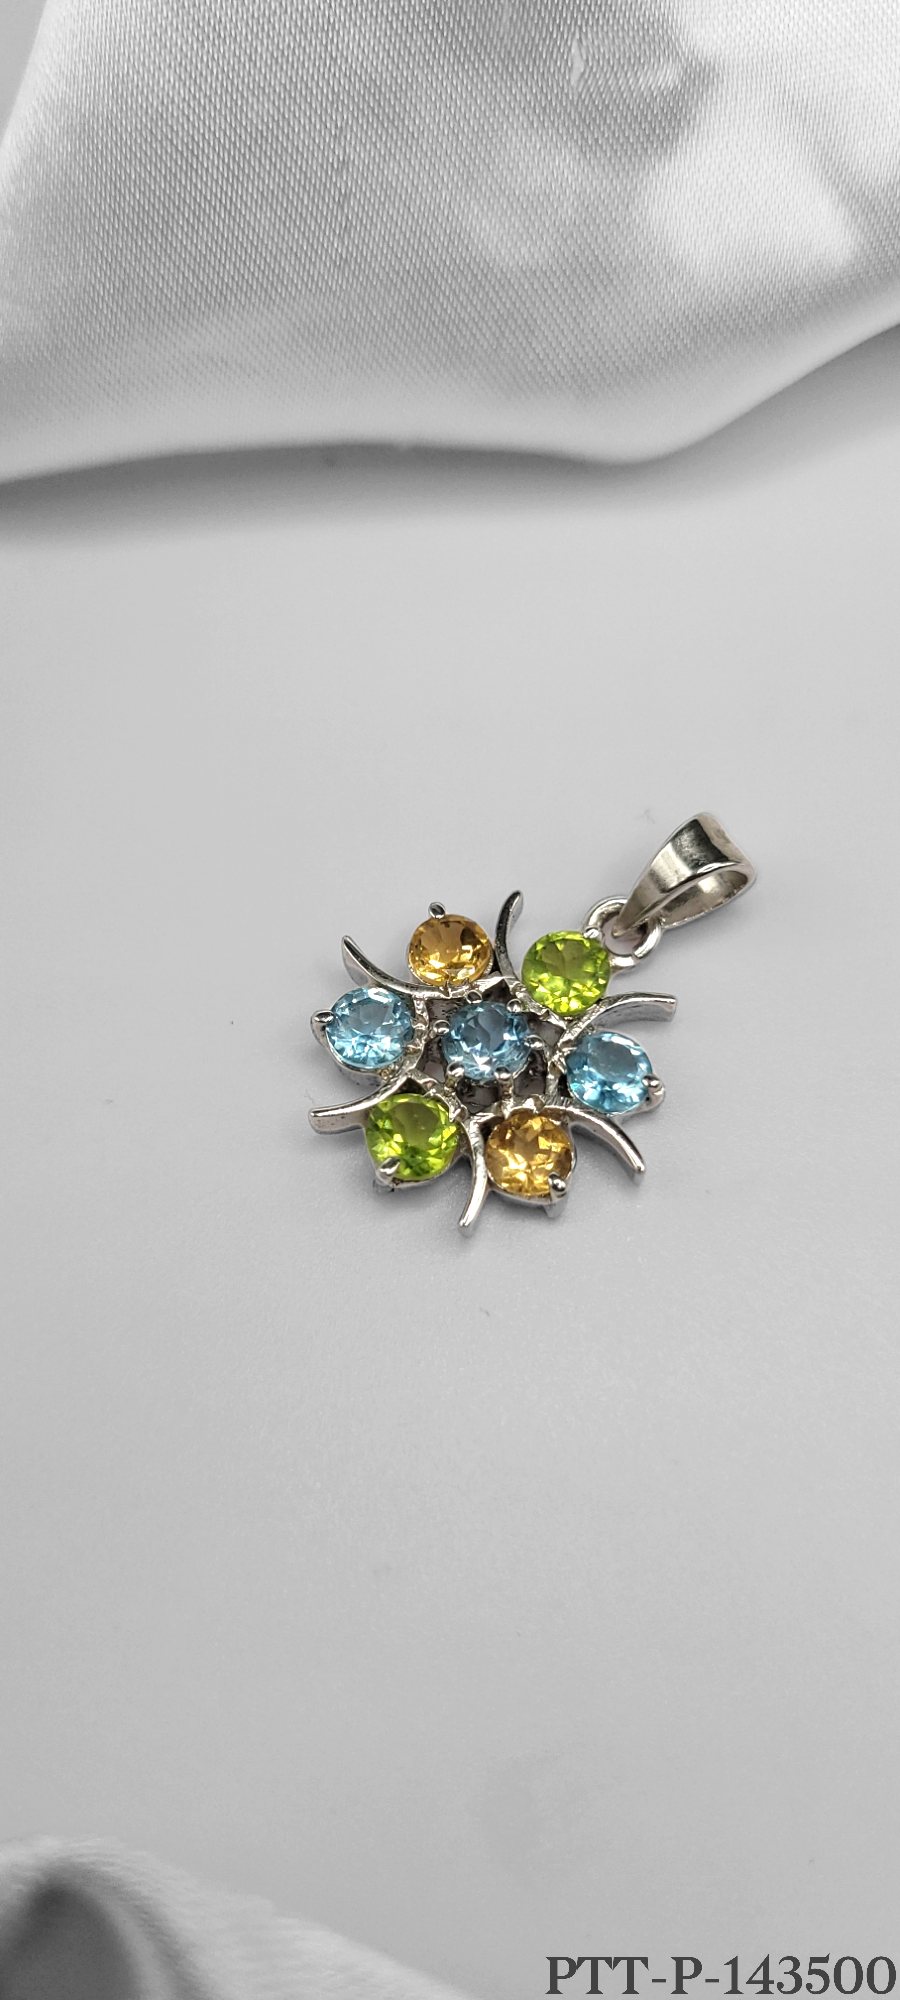 STRIKING COMBINATION OF PERIDOT, YELLOW TOPAZ & BLUE TOPAZ PENDANT ON STERLING SILVER. PERIDOT KNOWN AS THE STONE OF CAMPASSION. TOPAZ SYMBOLIZES LOVE & AFFECTION, MERGED INTO A UNIQUE PIECE